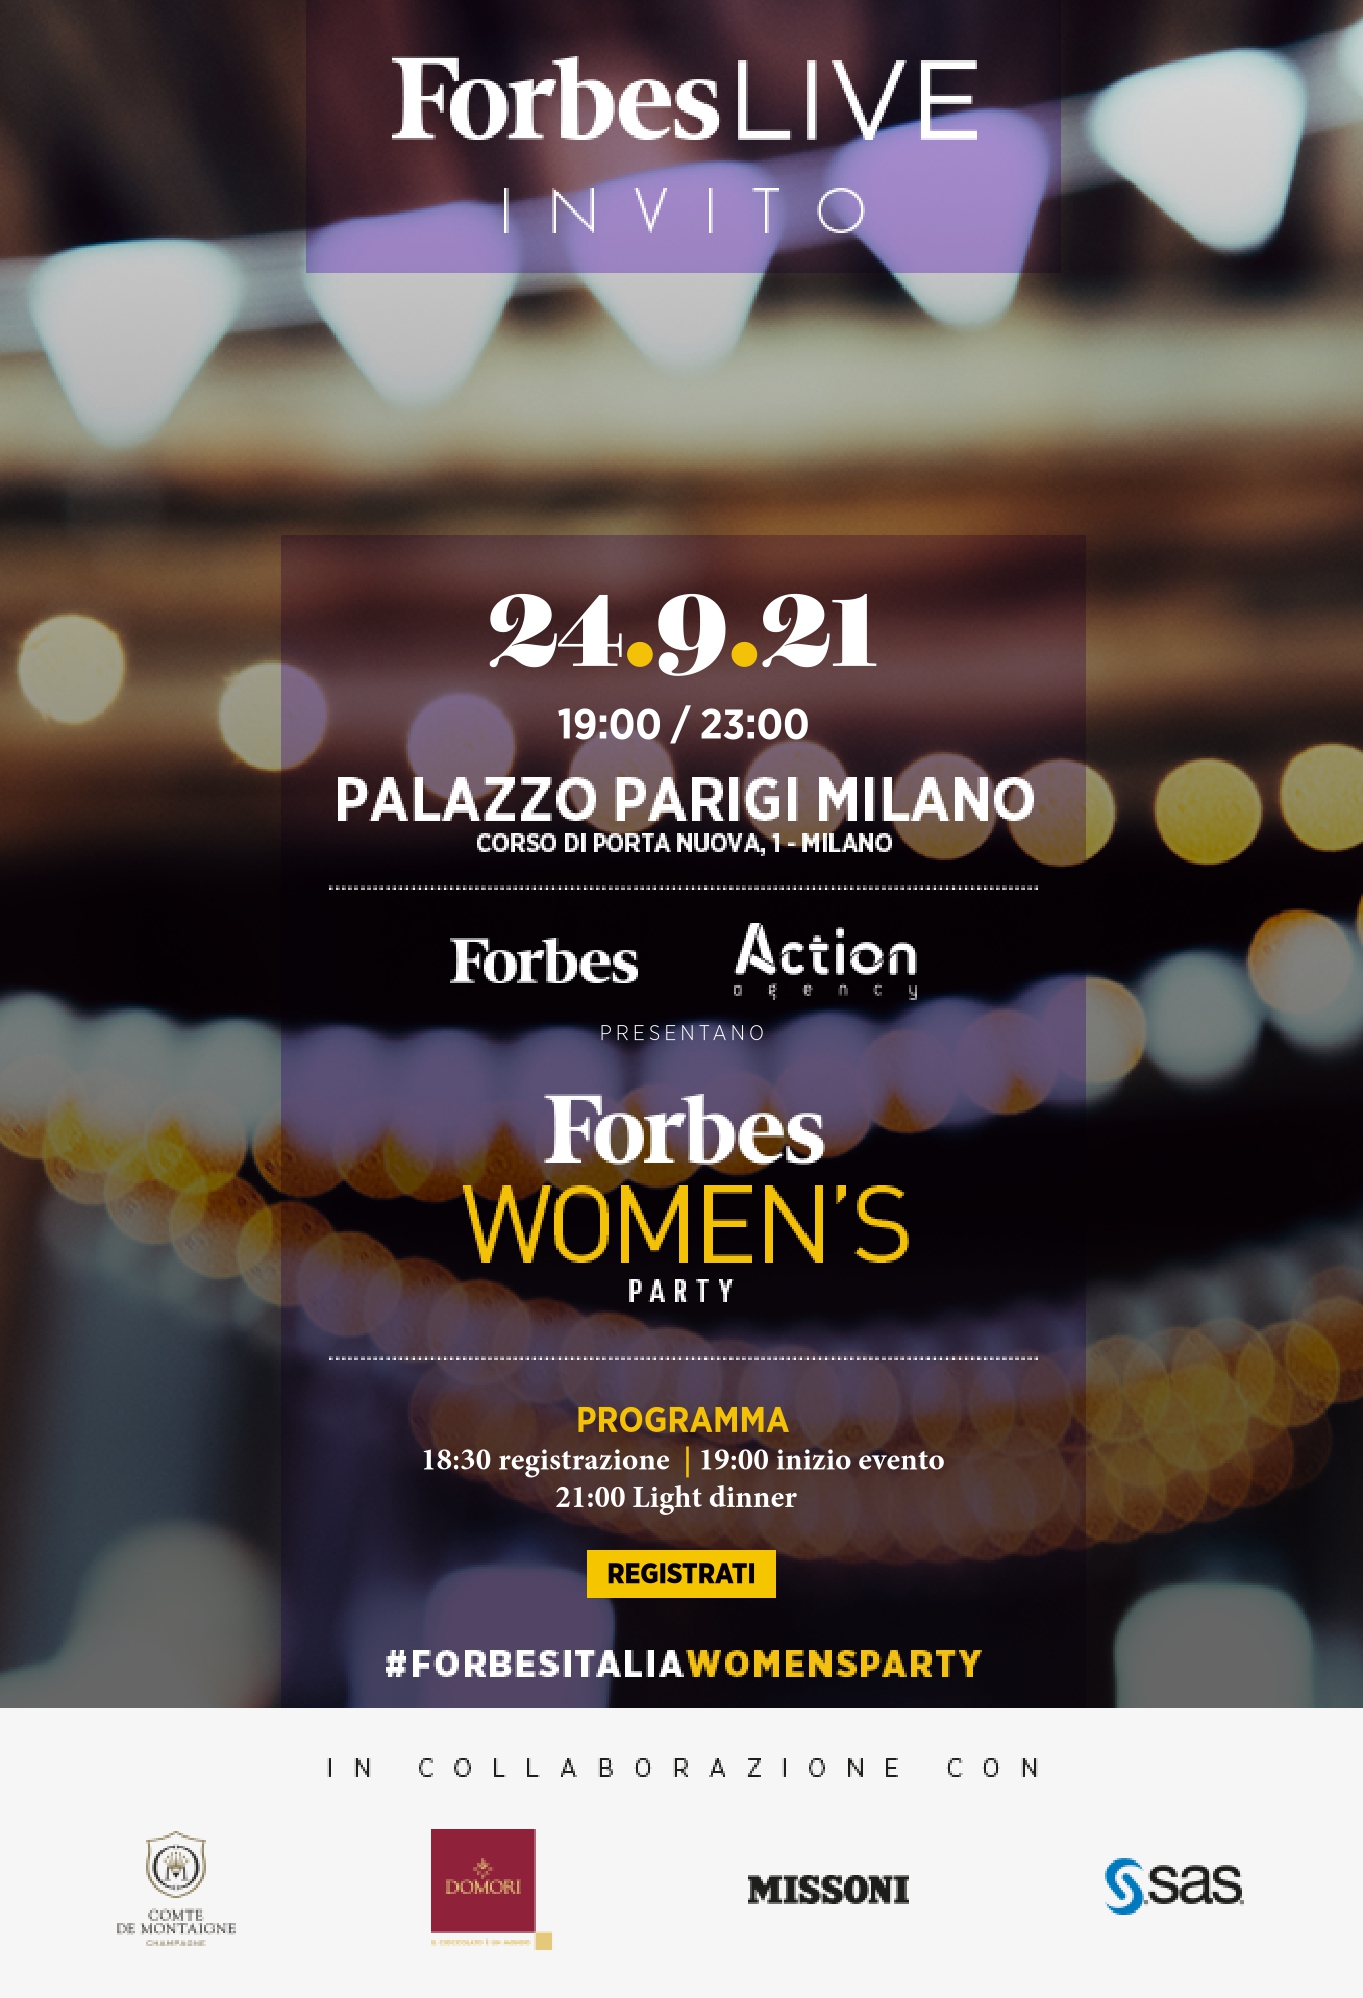 Forbes WOMENS PARTY_Invito (1)_page-0001.jpg